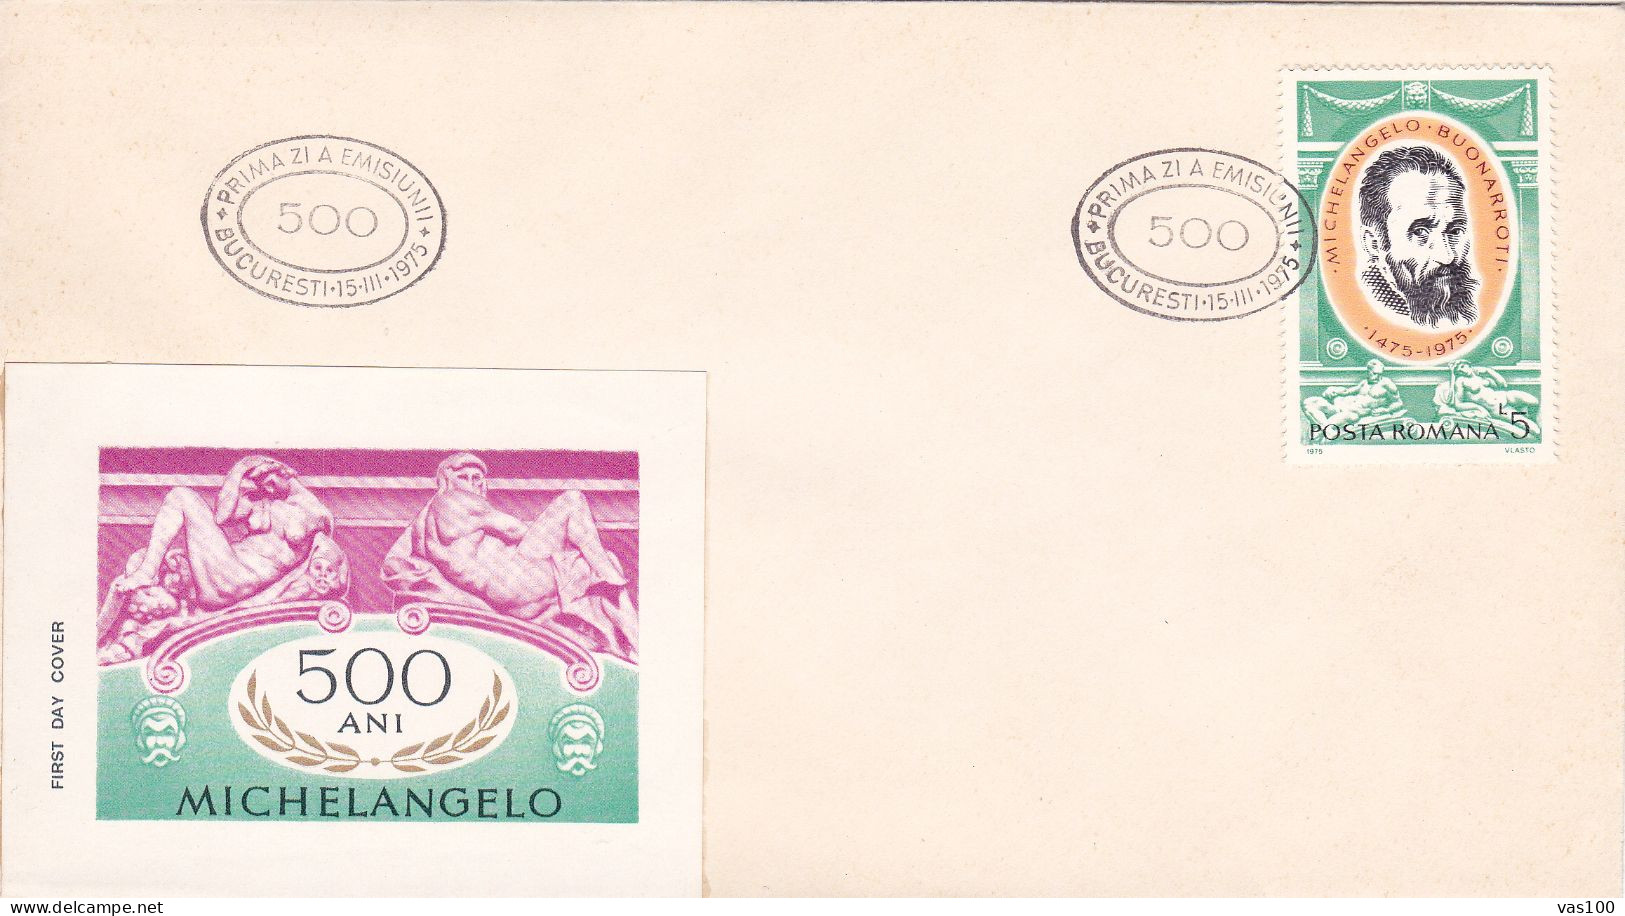 SCULPTOR AND PAINTER MICHELANGELO 1975 COVERS FDC ROMANIA - FDC